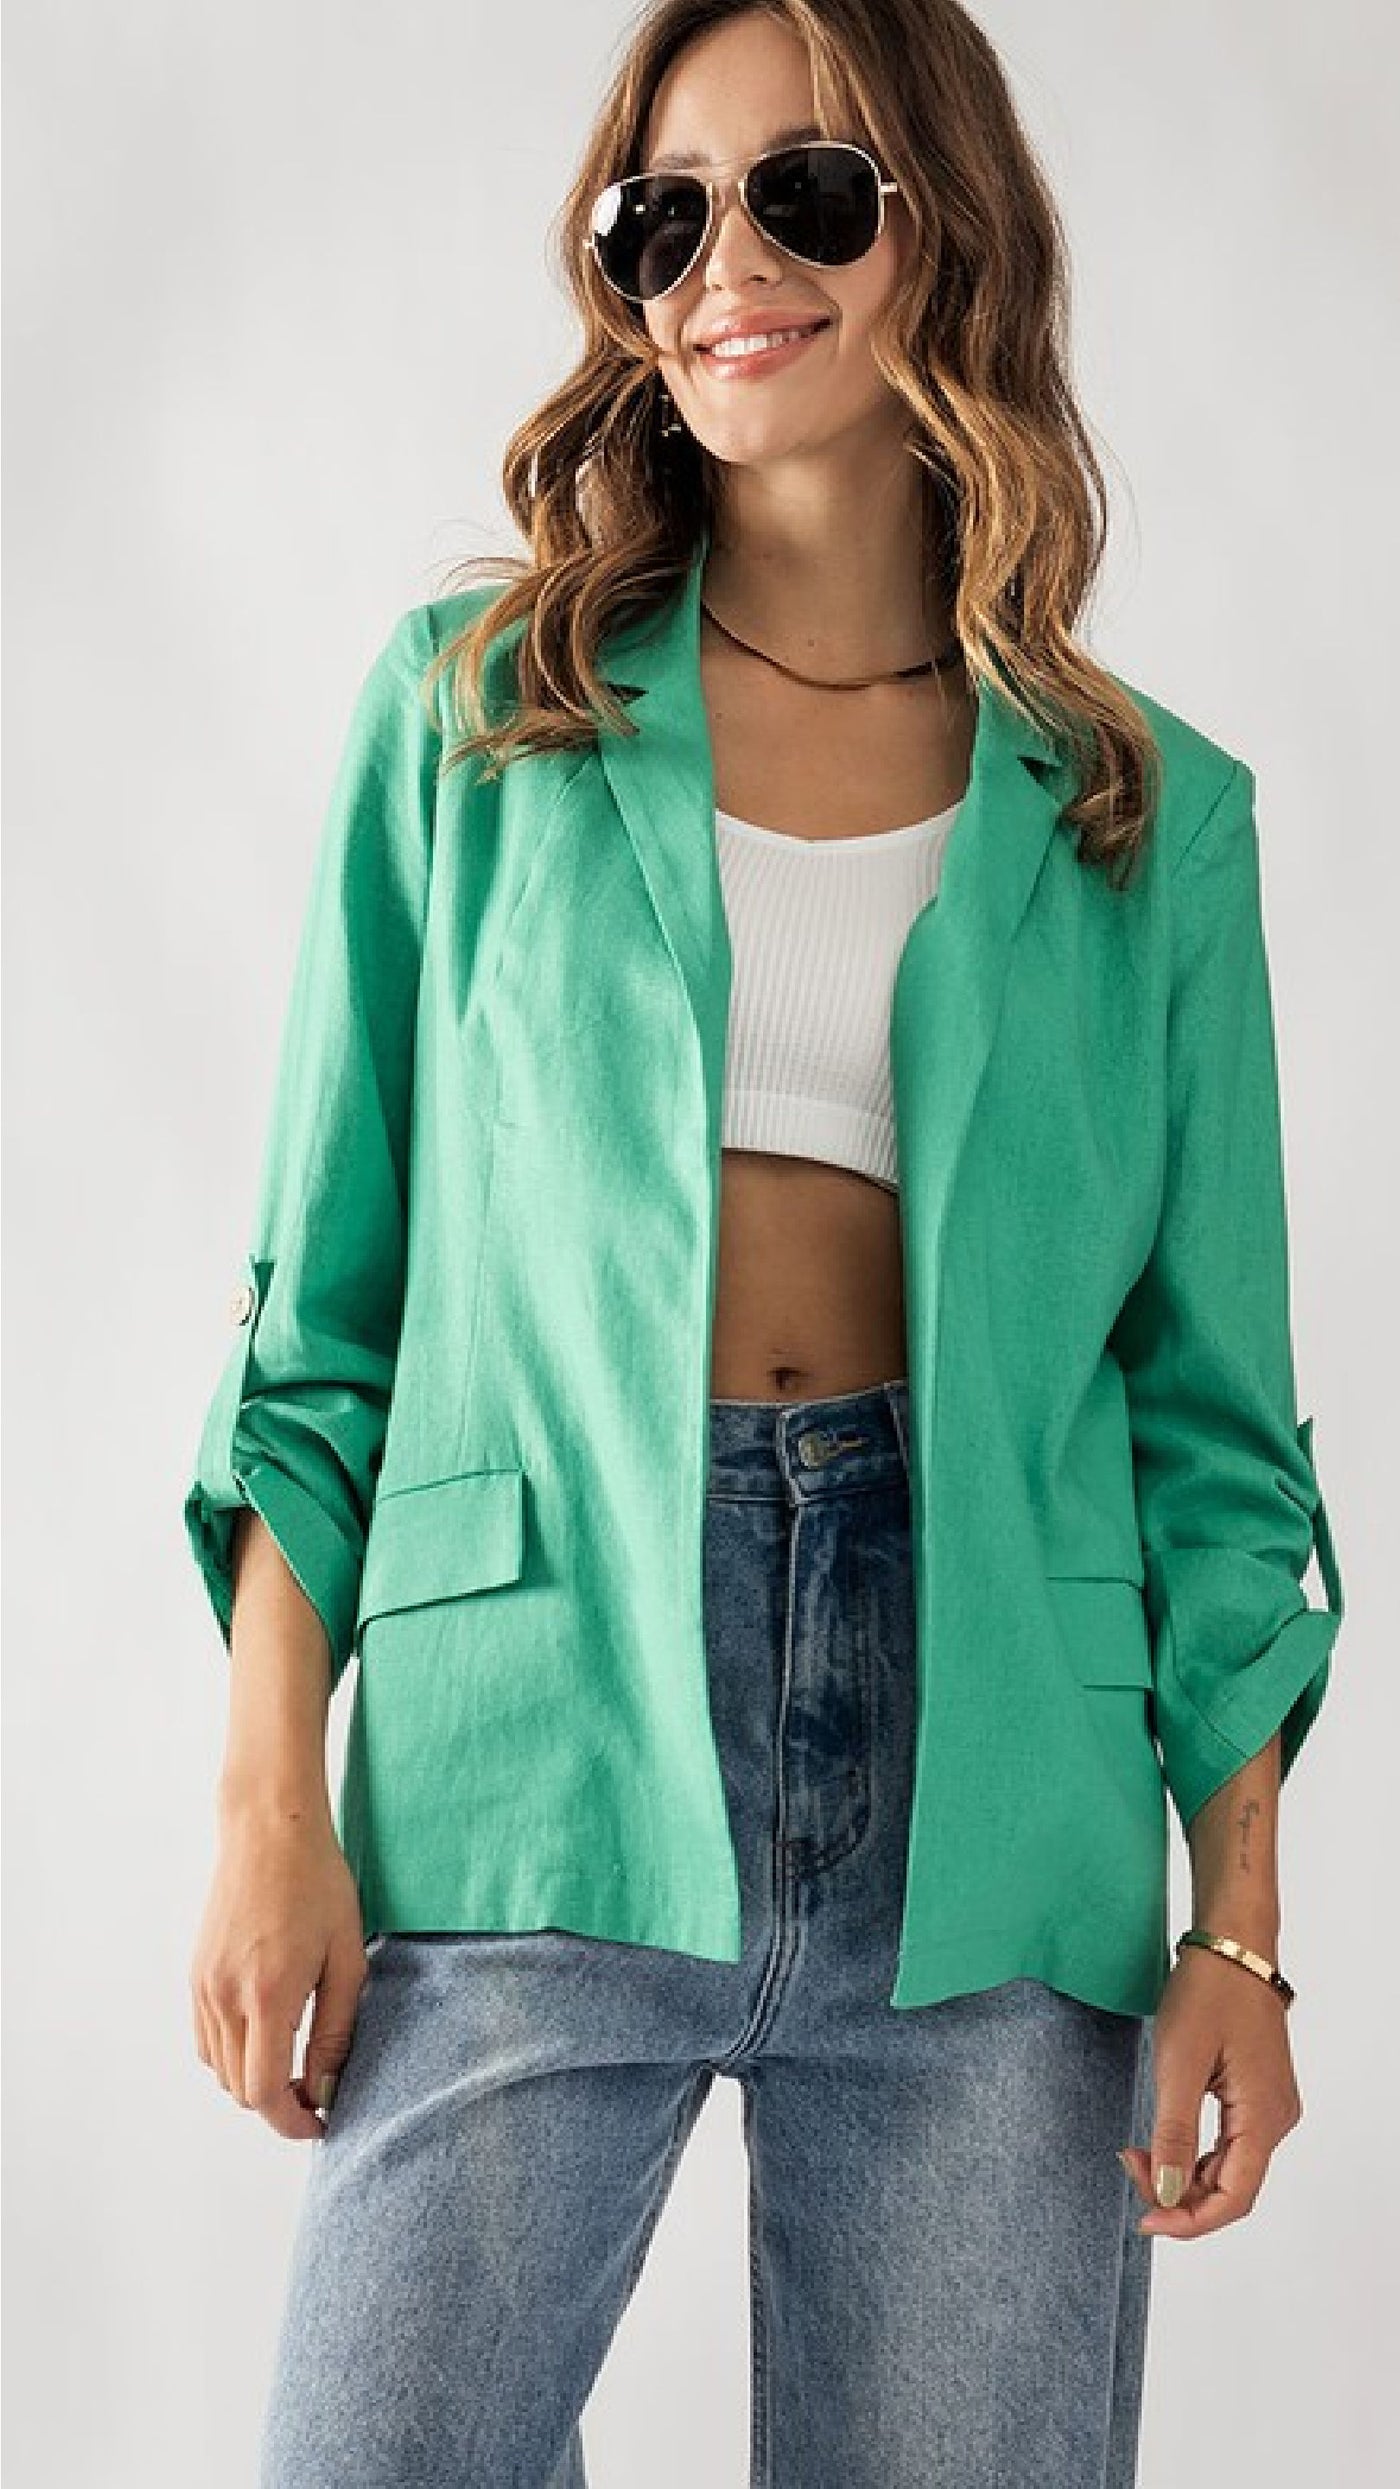 Lucky Me Blazer - Piper and Hollow Boutique